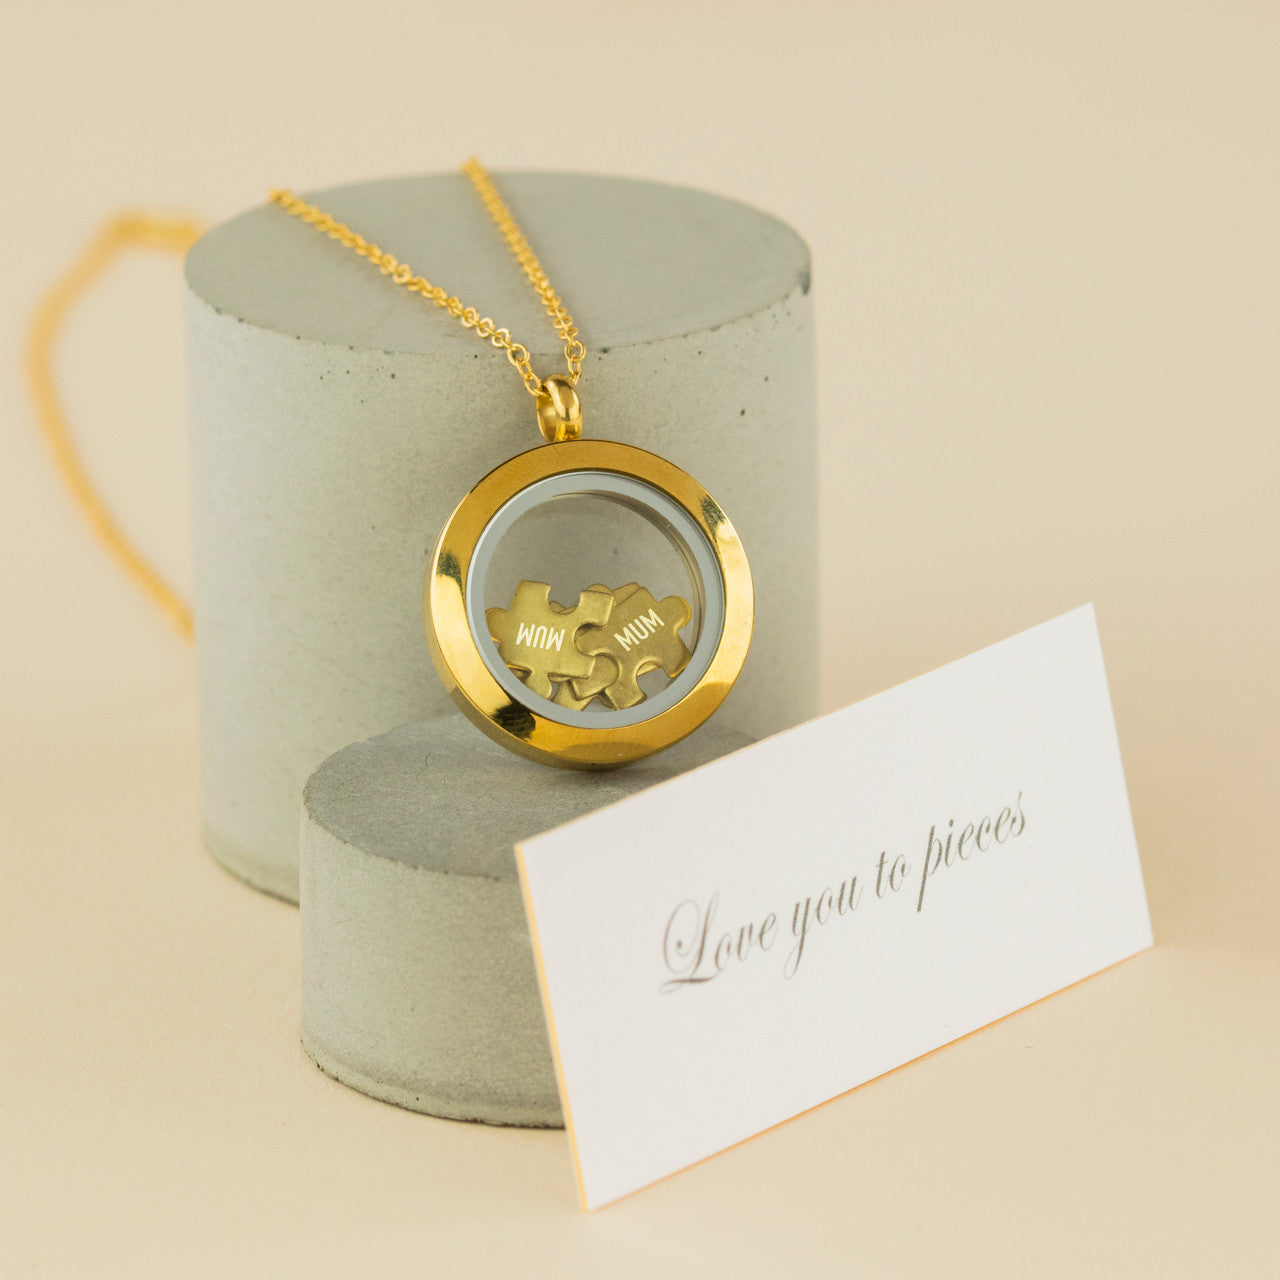 brass rimmed glass circle pendant with five brass jigsaw pieces inside. One piece says "Mum". The Love you to Pieces necklace.